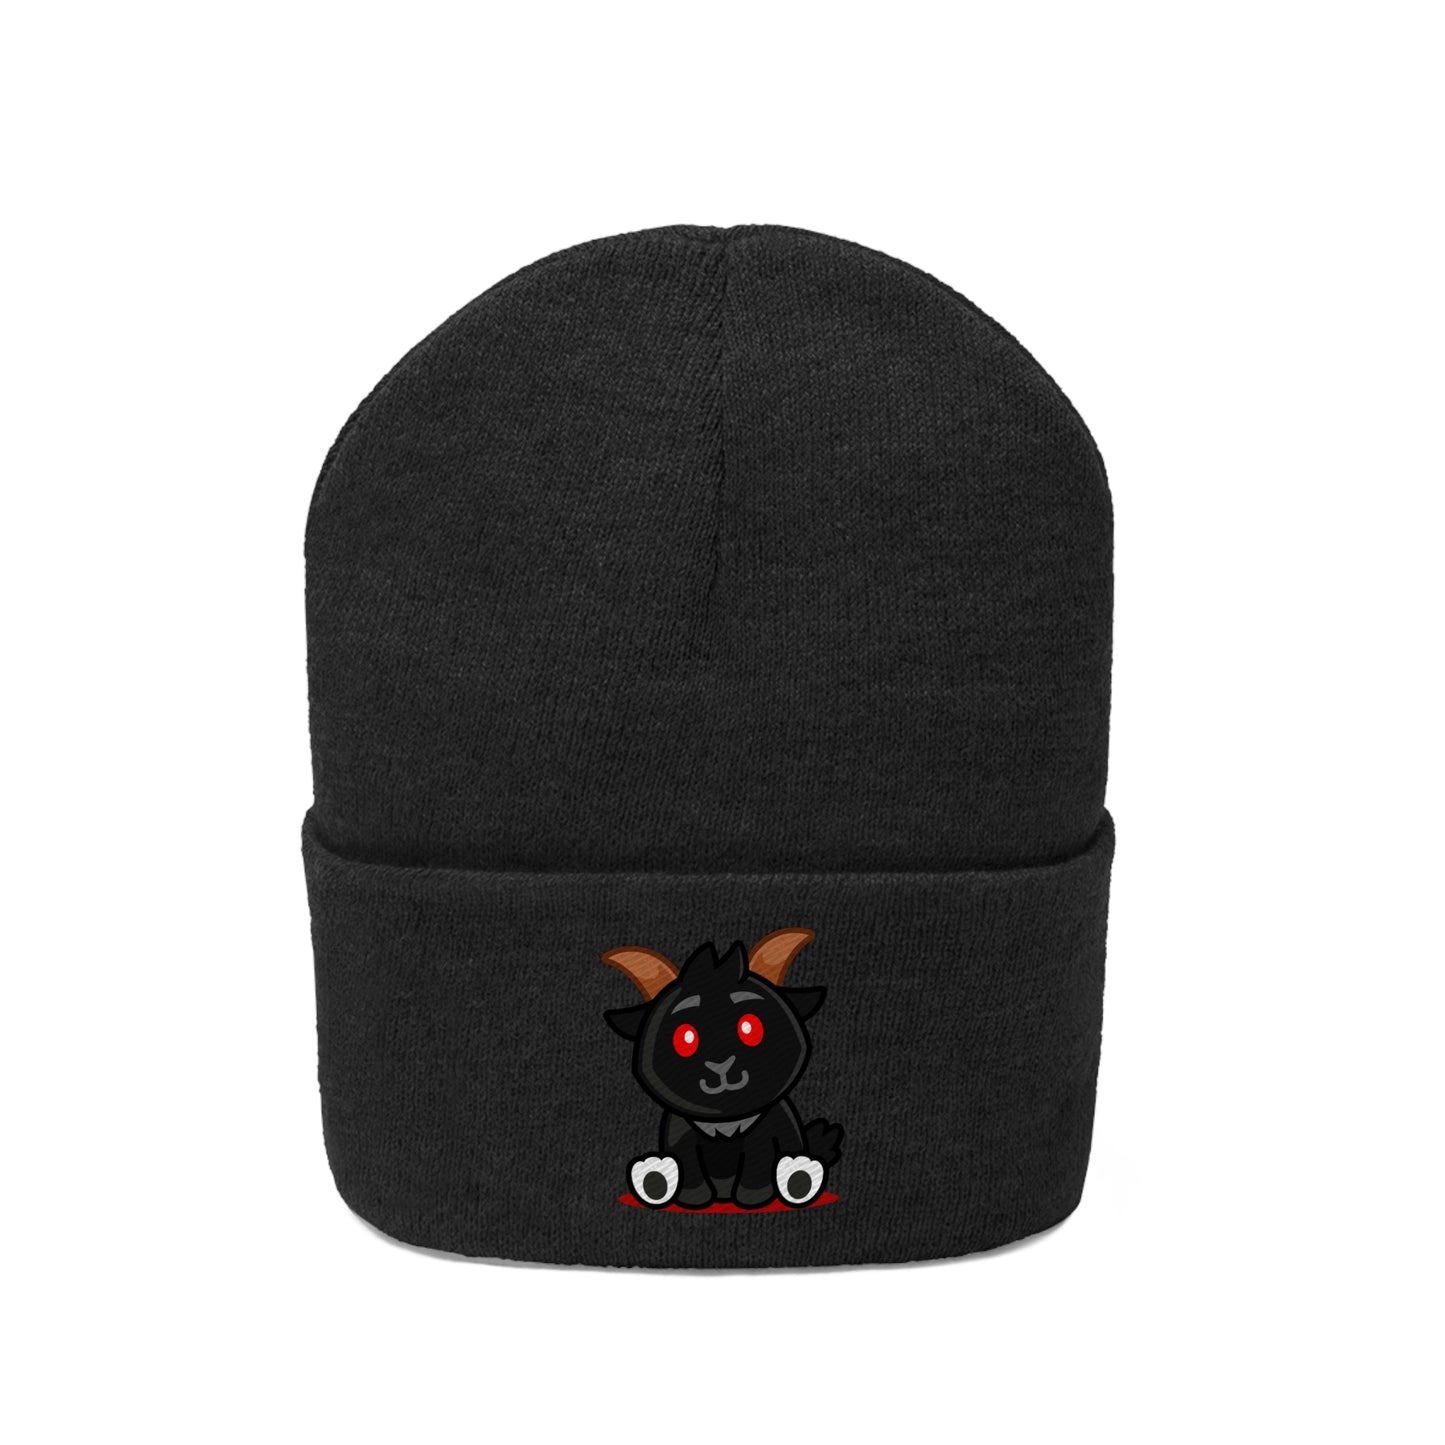 Witch's Move Coven Mascot Knit Beanie